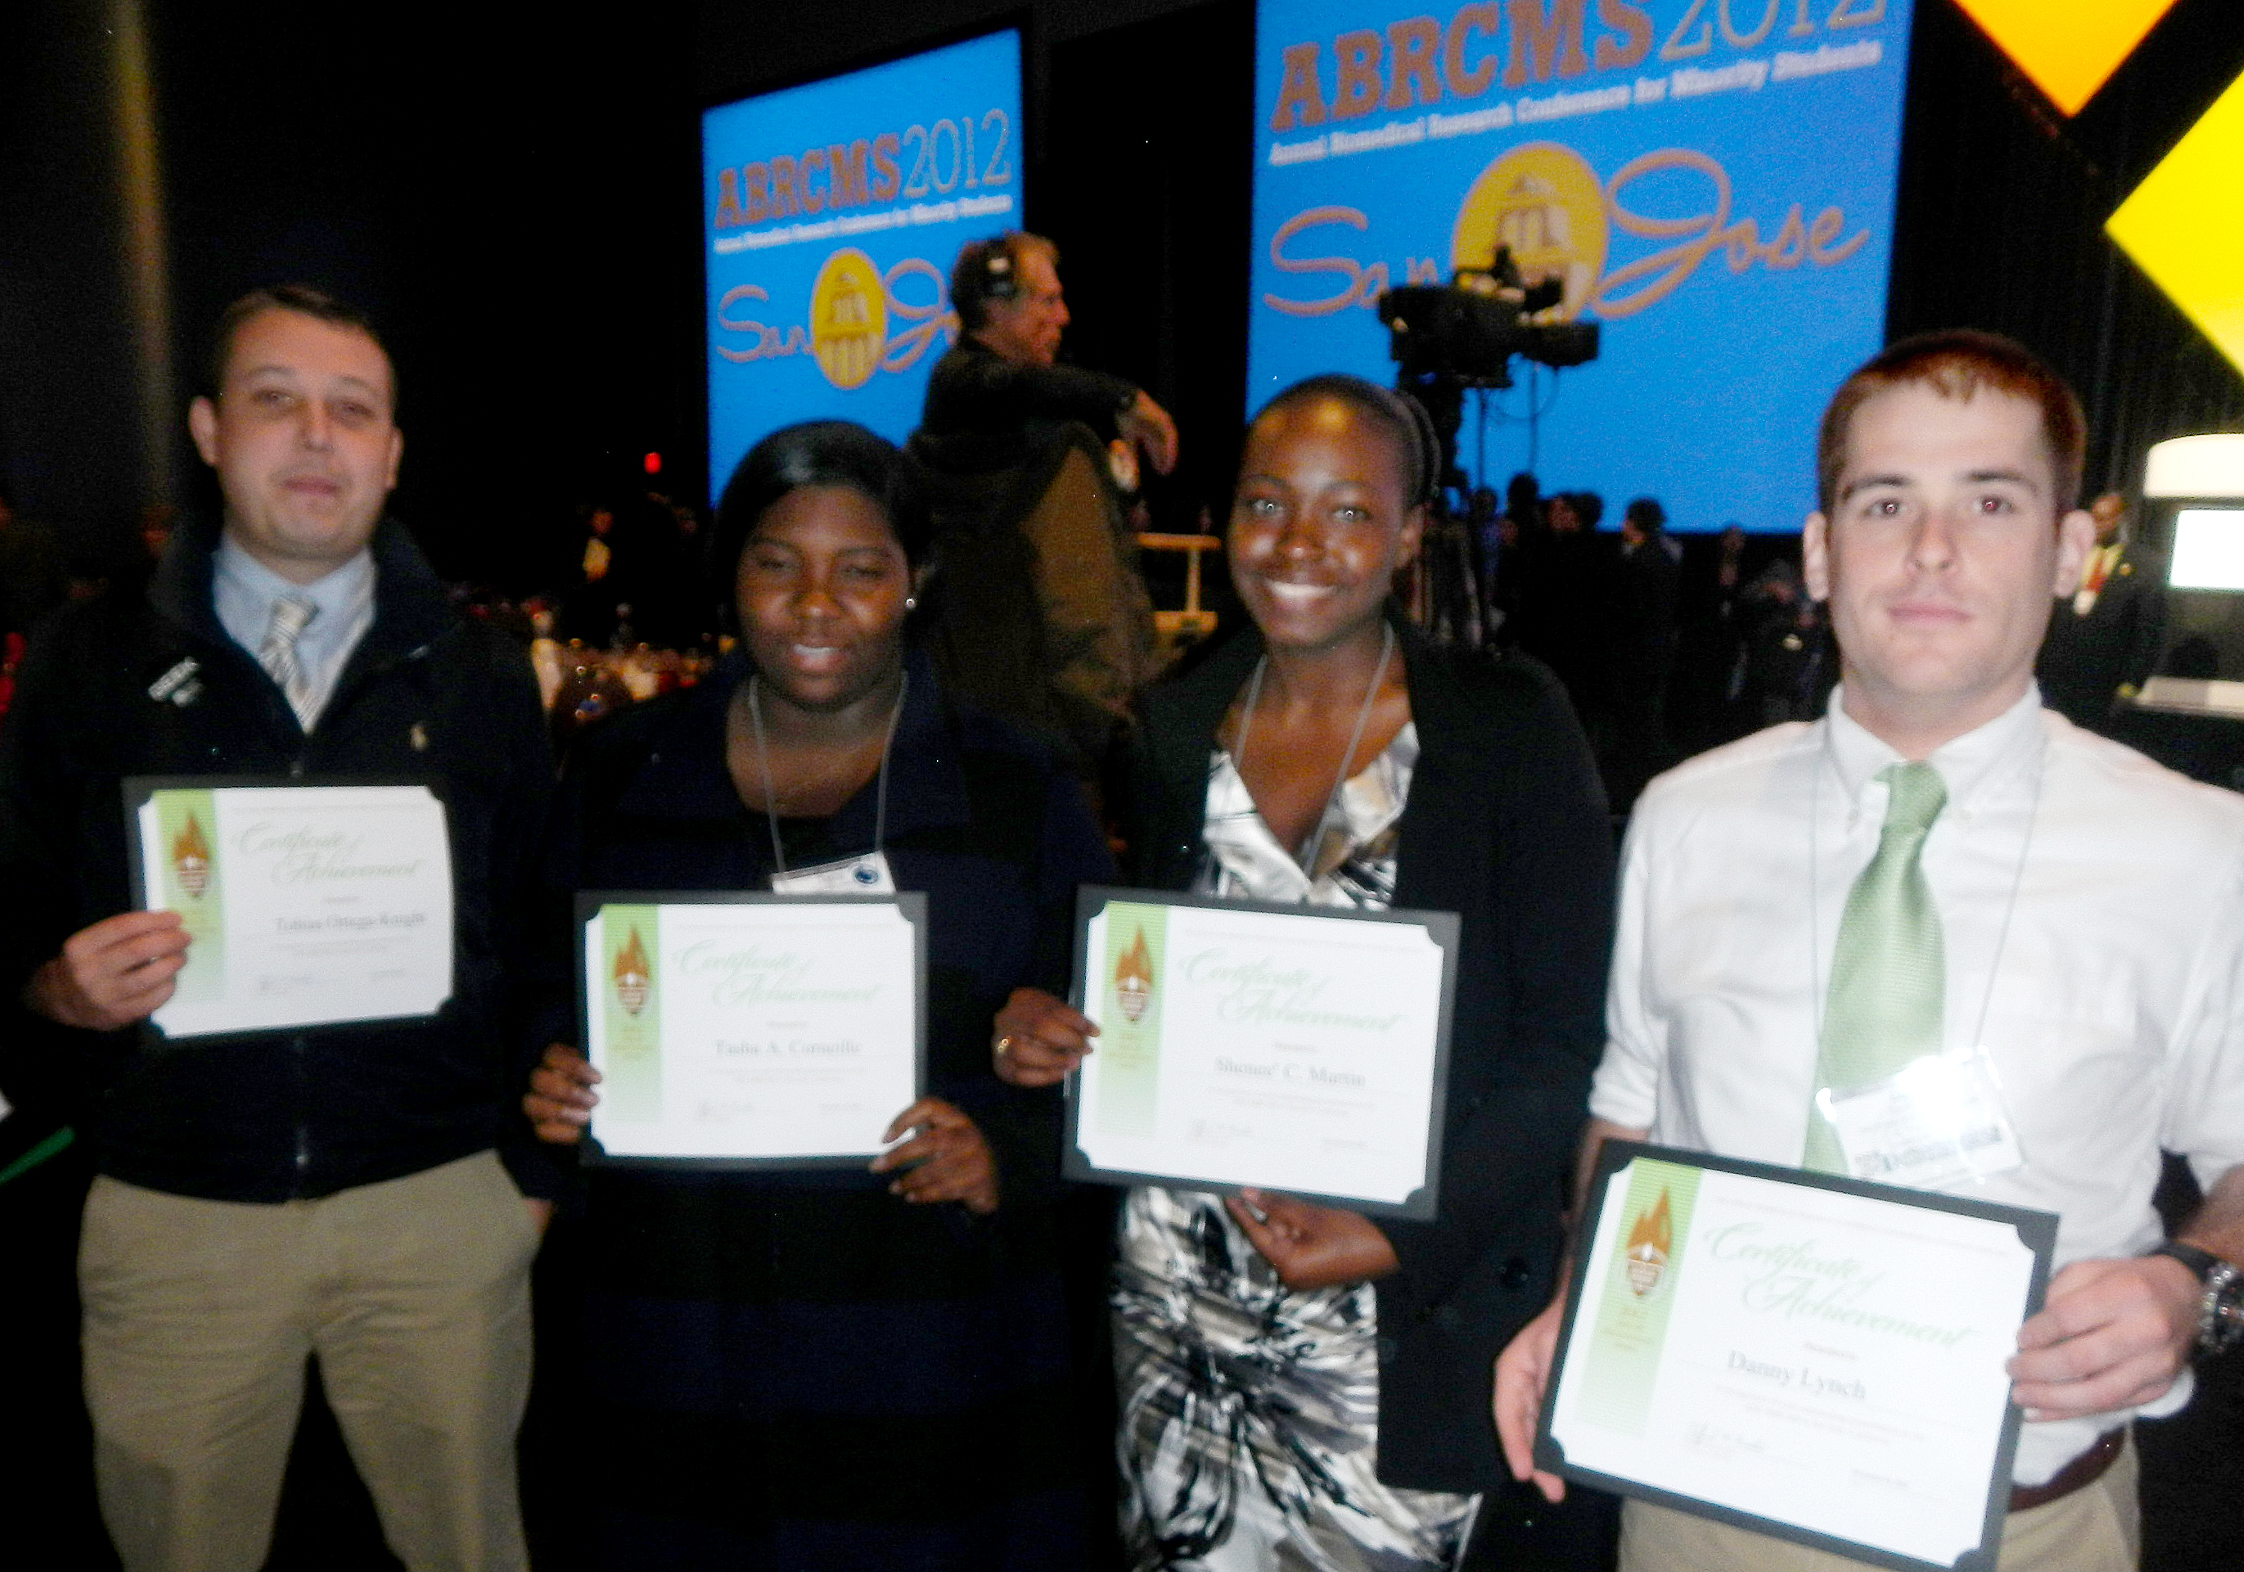 UVI Student Winners: Tobias Ortega Knight (left to right), Tasha Cornelle, Shenee' Martin and Danny Lynch receive awards for their presentations at the 12th Annual Biomedical Research Conference for Minority Students in San Jose, California.